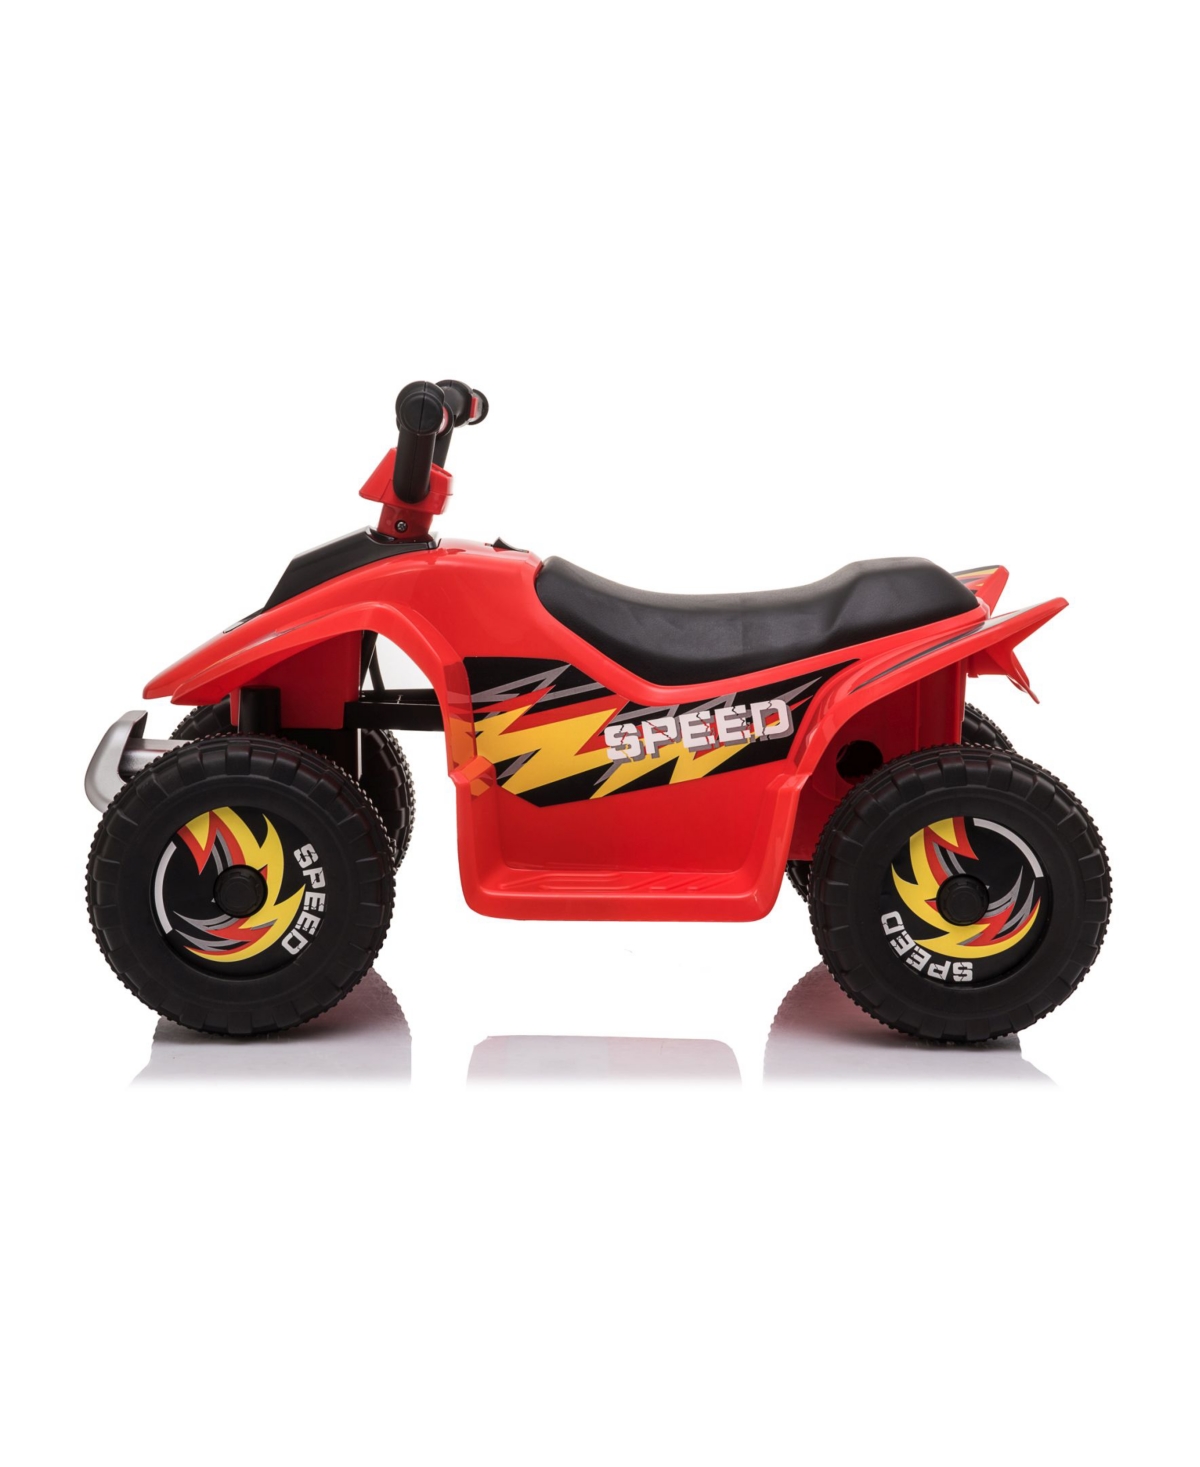 Shop Blazin' Wheels 6 Volt Battery Operated Mini Quad Ride On In Red